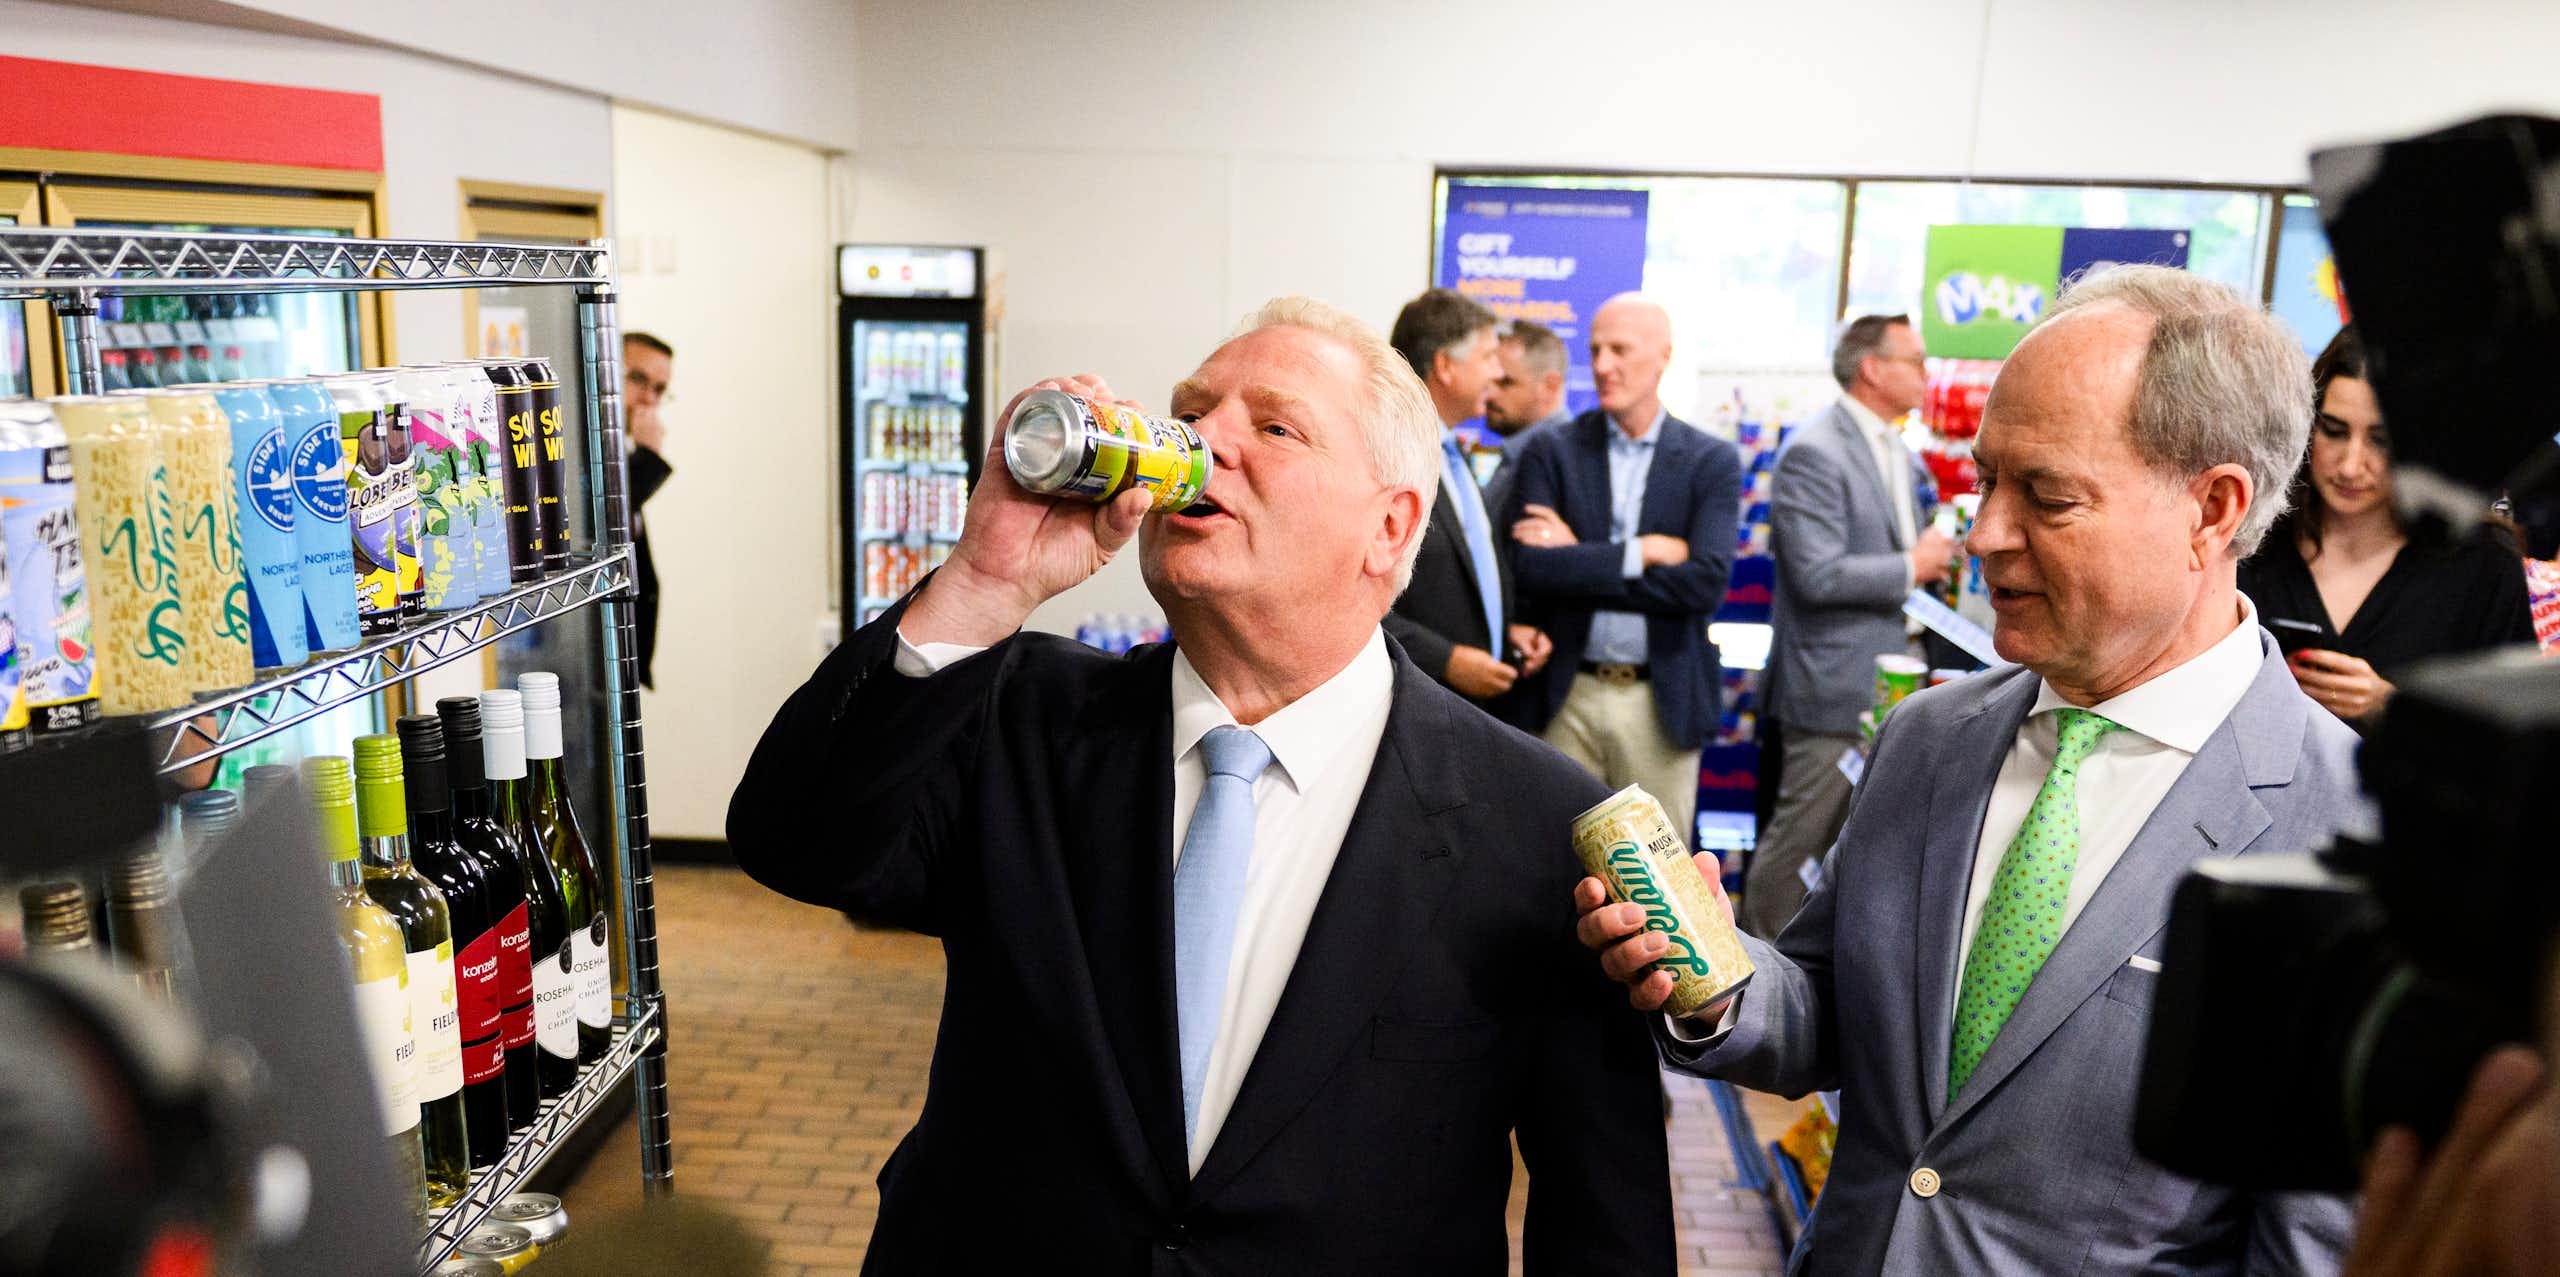 A balding man in a dark suit and pale blue tie appears to be slugging back a beer.